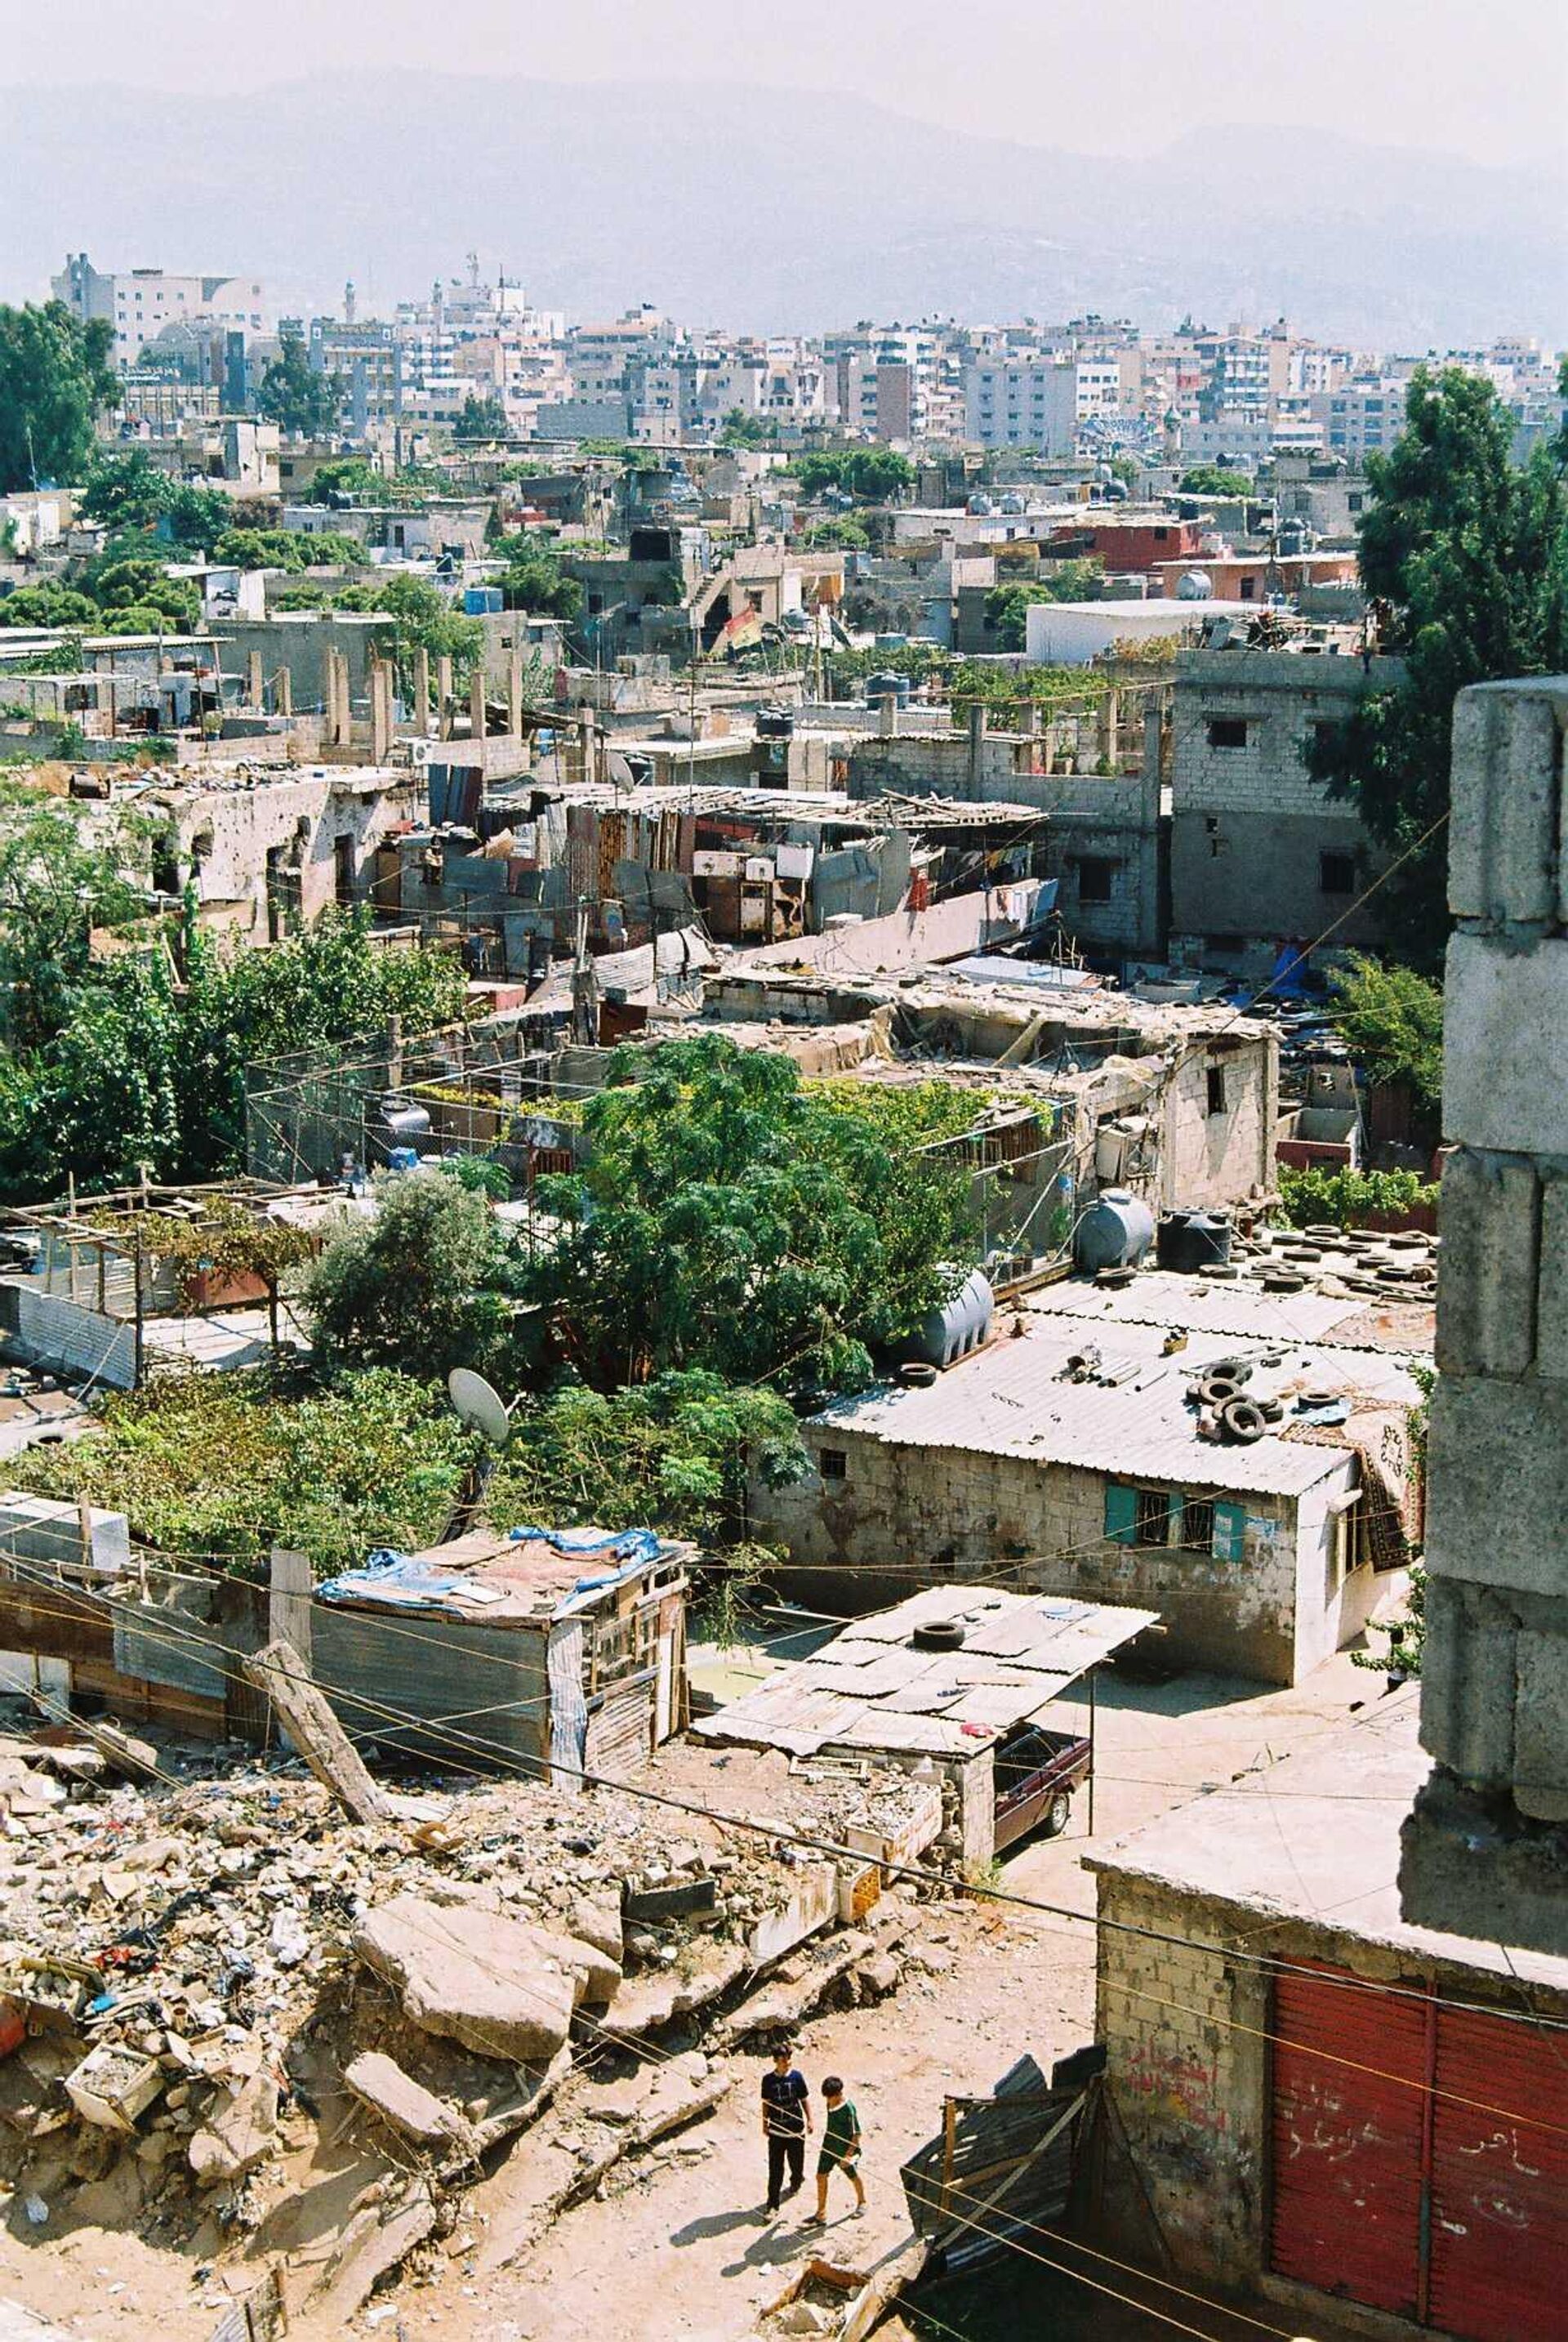 The ruins of the Sabra neighborhood and Shatila refugee camp in Beirut seen in 2003, 21 years after the massacre of Palestinians by the Lebanese Forces - Sputnik International, 1920, 09.09.2022